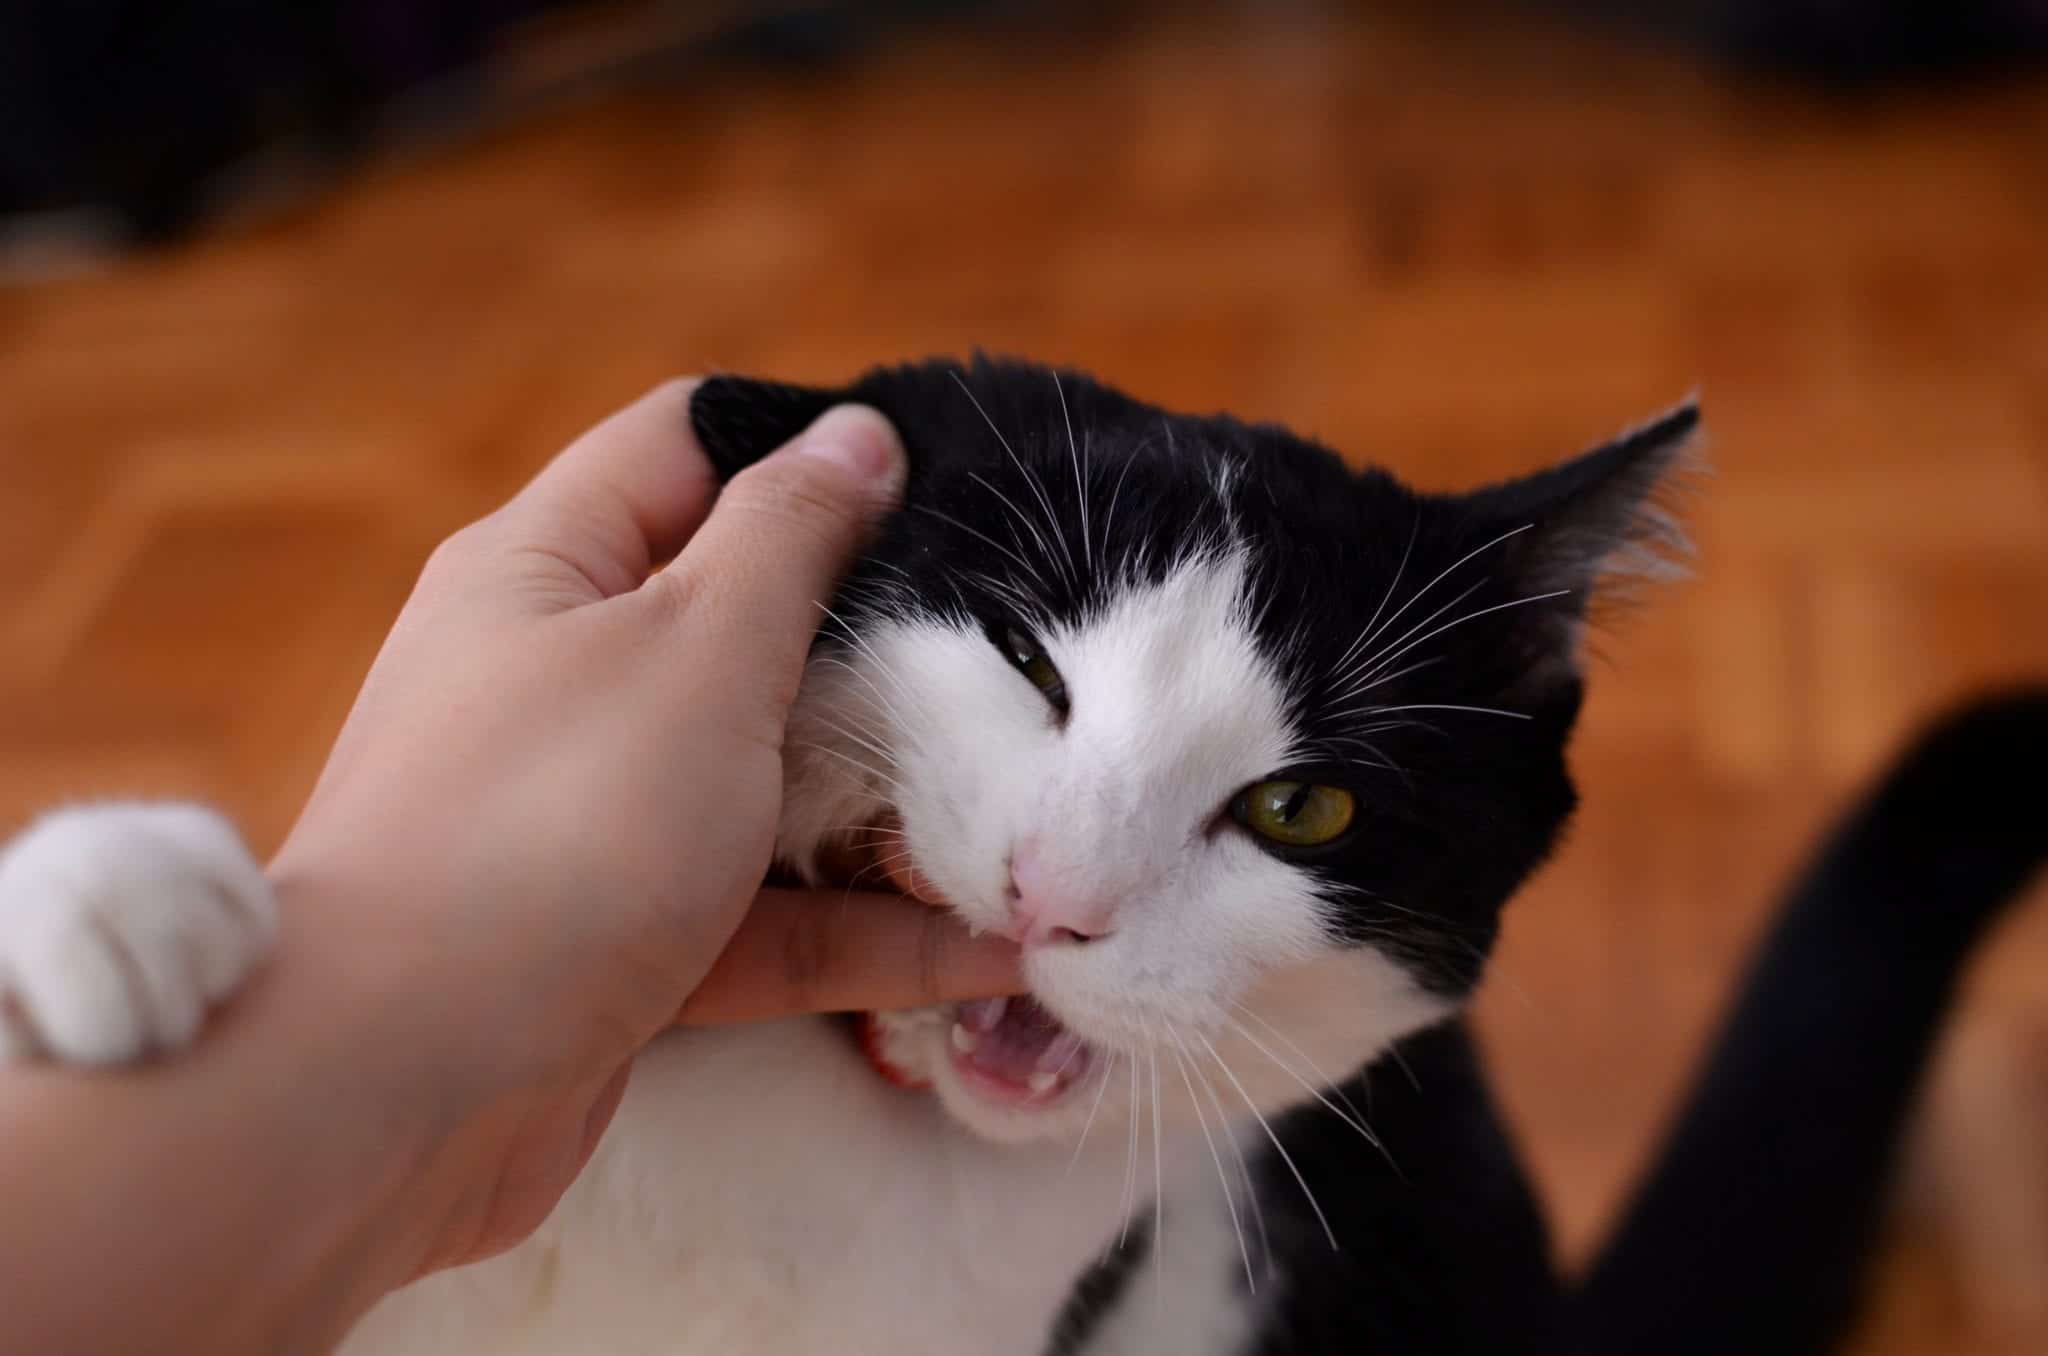 Why Does My Cat Bite Me When I Pet Him?